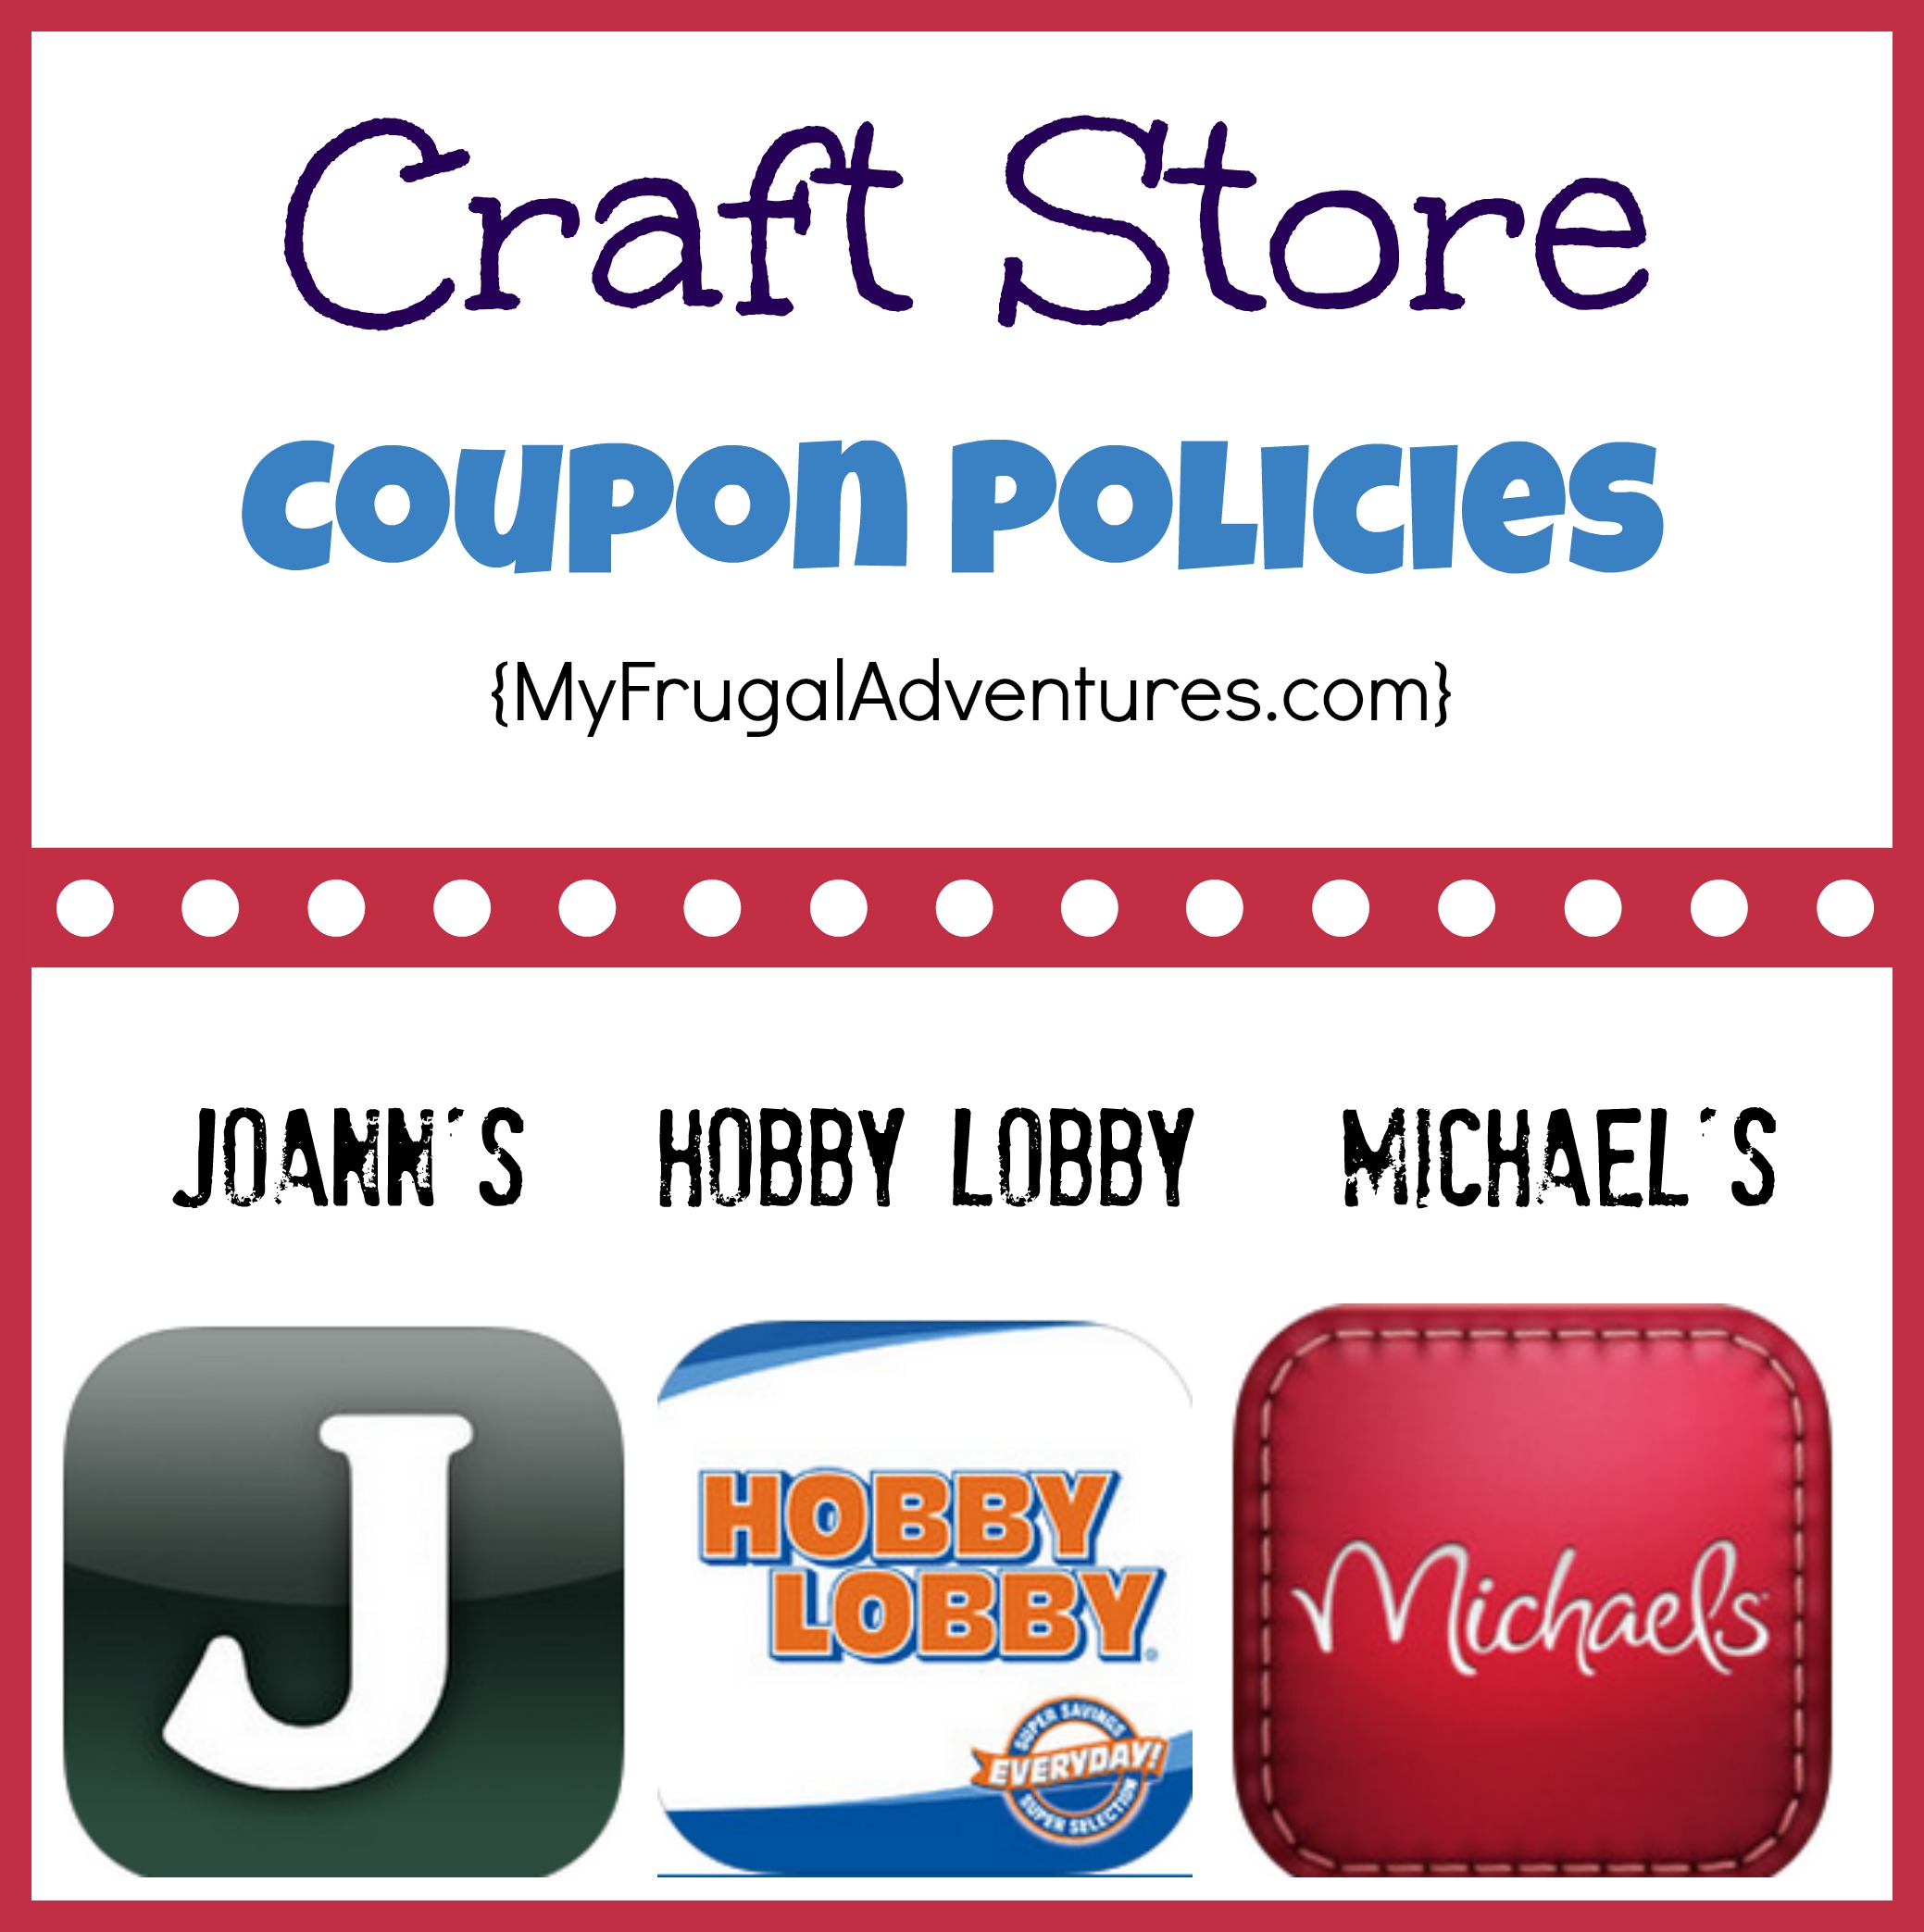 https://myfrugaladventures.com/wp-content/uploads/2013/09/Craft-Store-Coupon-Policies-2.jpg